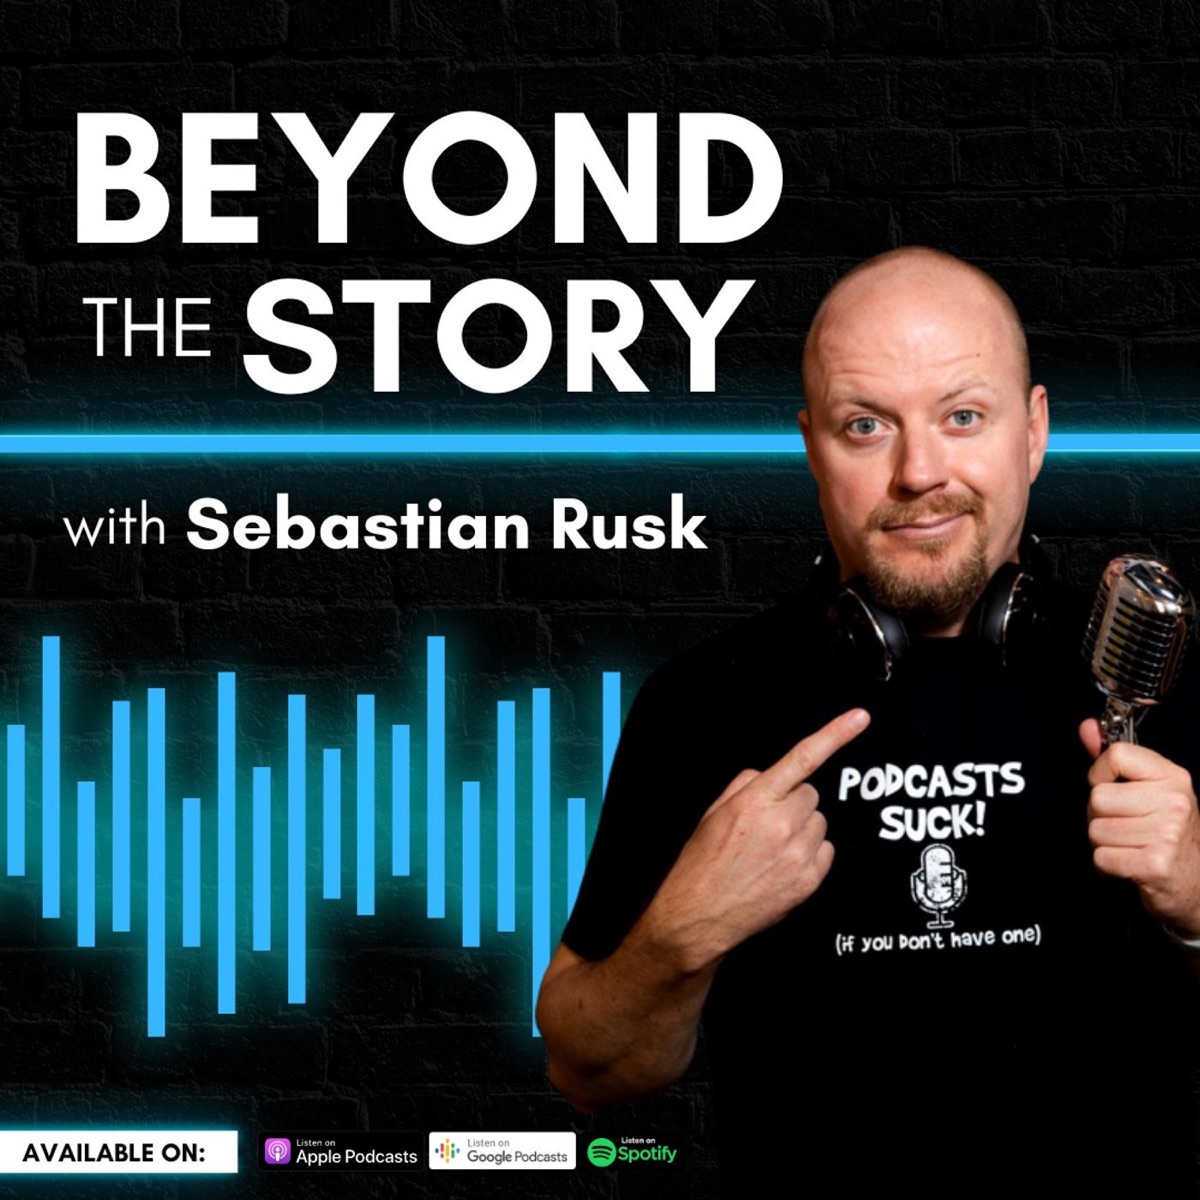 Beyond The Story with Sebastian Rusk – Podcast